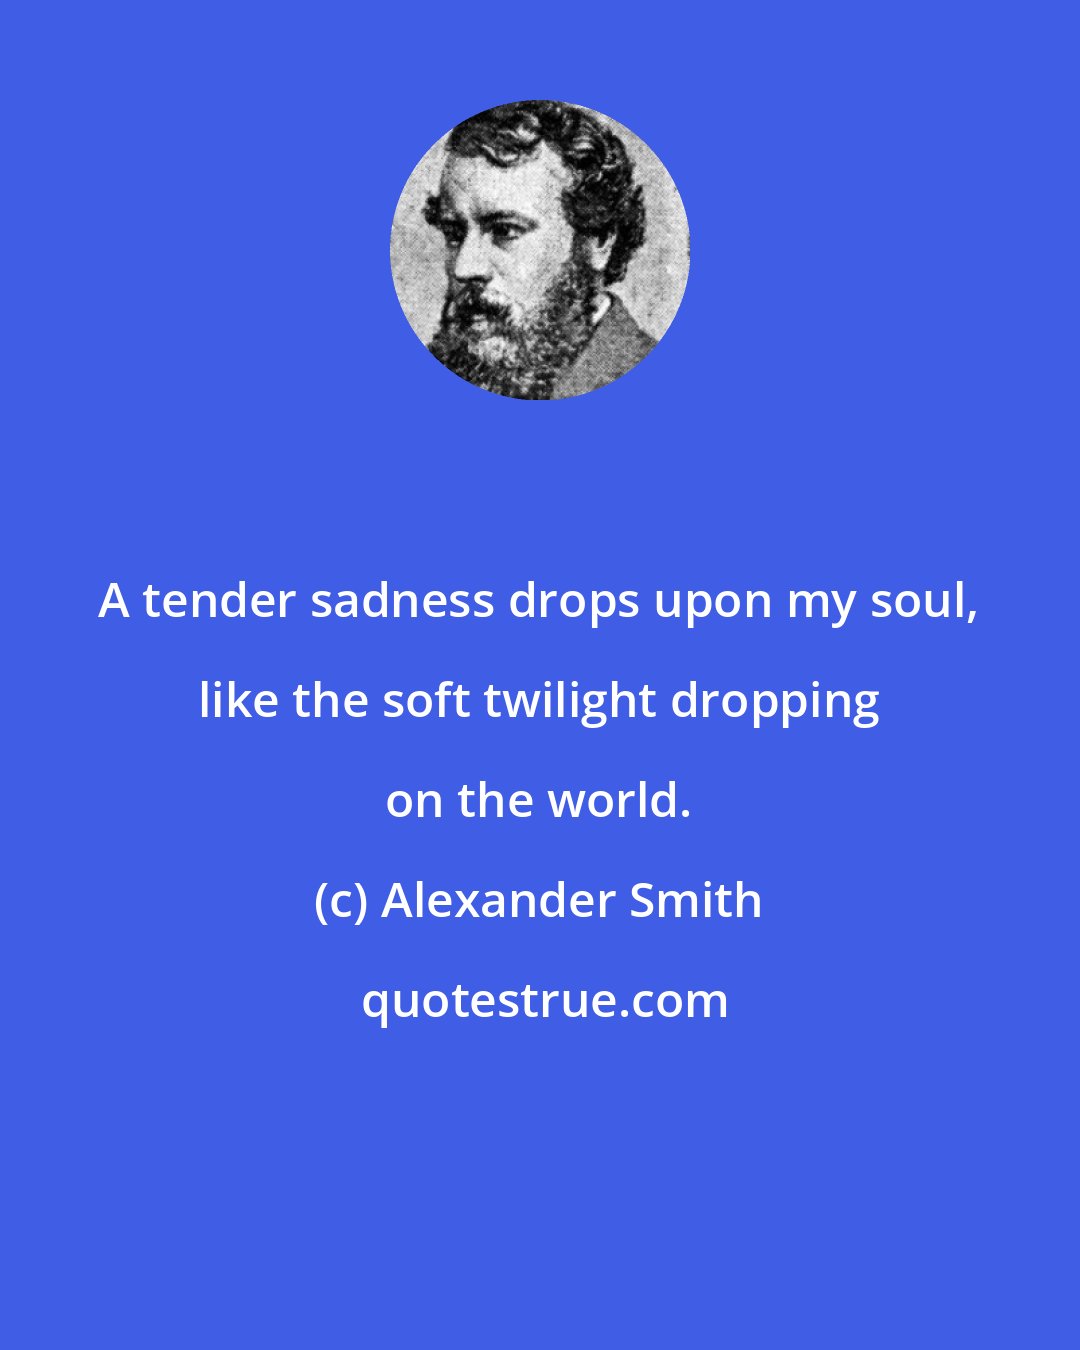 Alexander Smith: A tender sadness drops upon my soul, like the soft twilight dropping on the world.